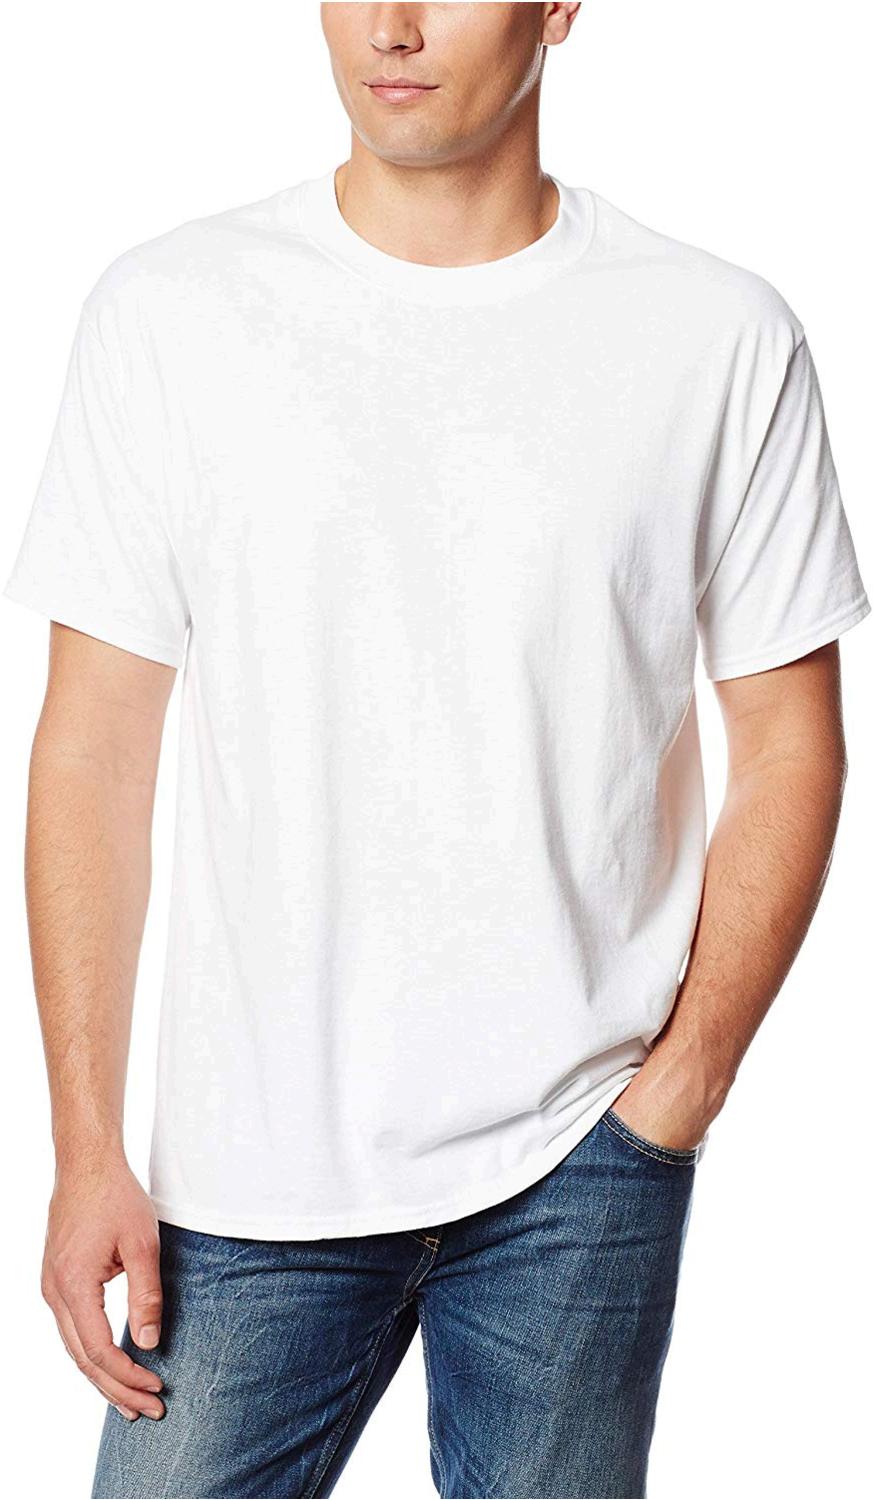 Hanes Men's Short Sleeve Beefy-T (Pack of 2), White, Large, White, Size ...